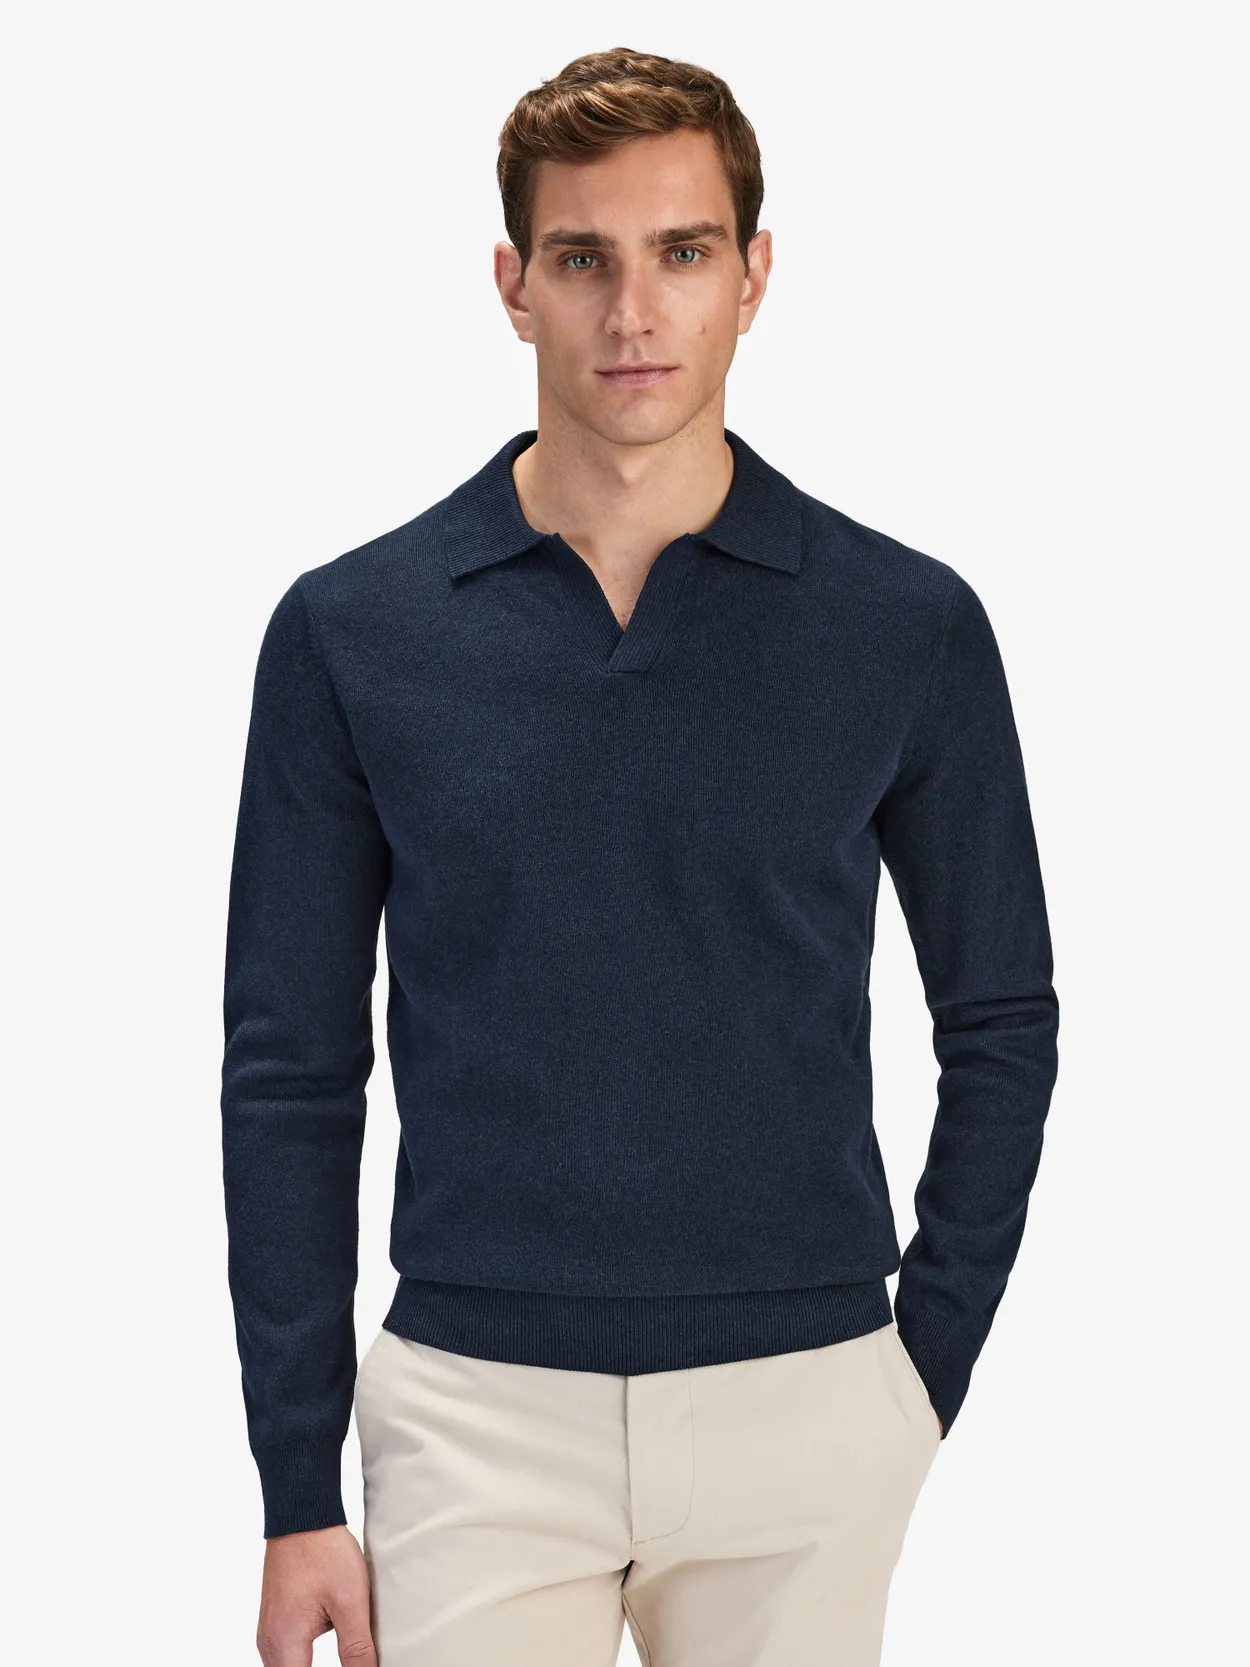 Navy Blue Polo Sweater